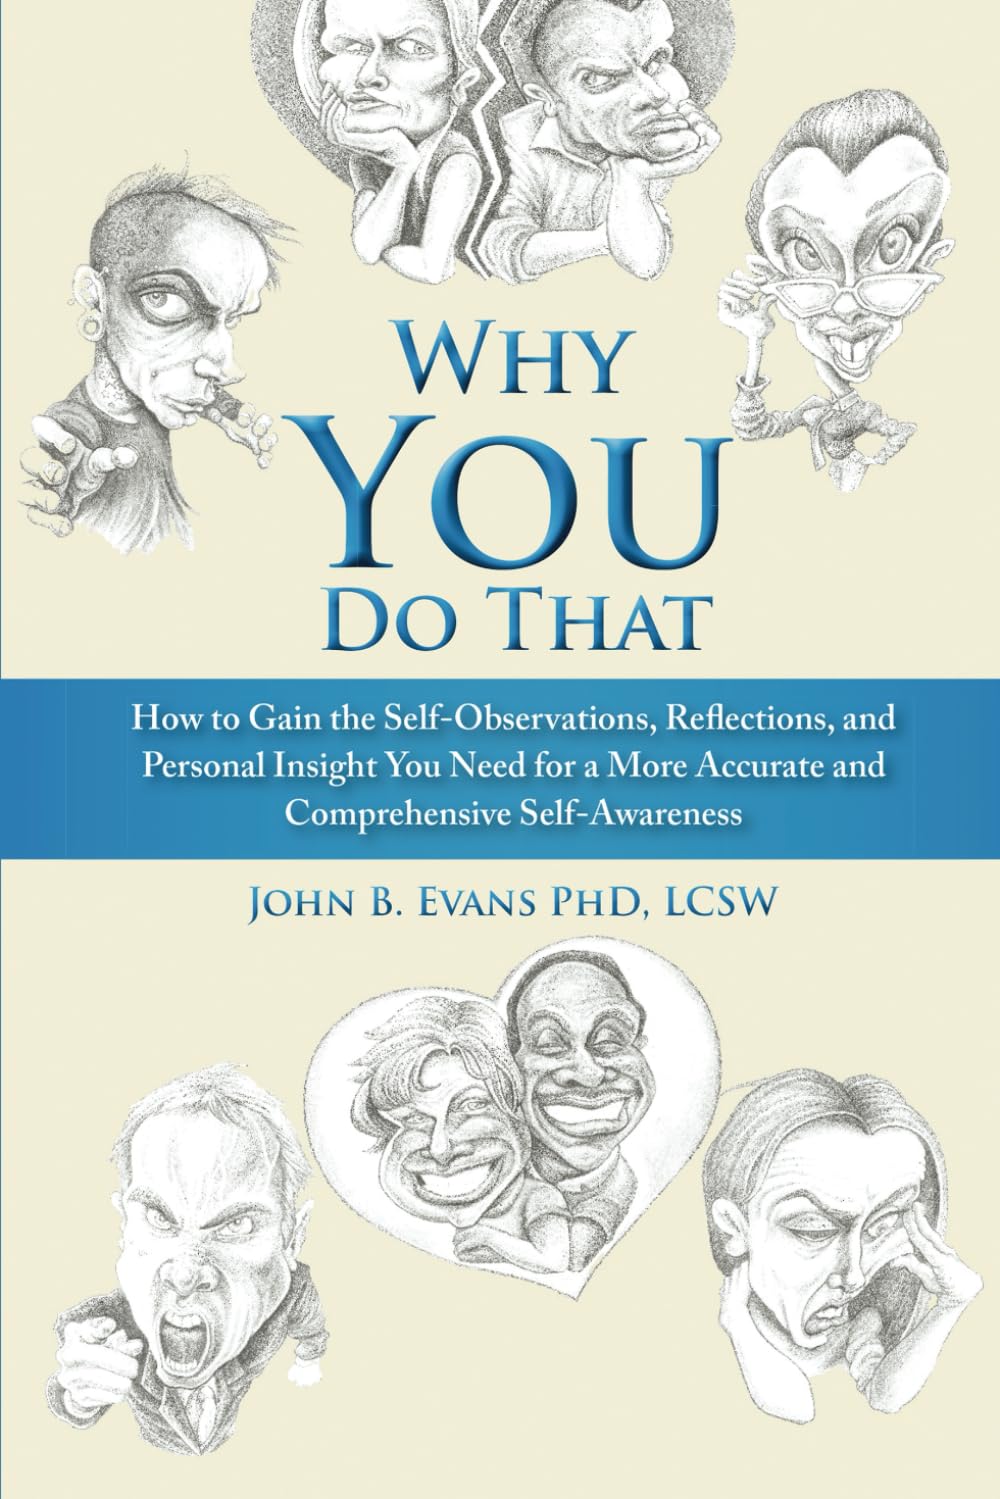 Unlocking The Mind: Dr. John B. Evans Explores the Secrets Behind Human Behavior in 'Why You Do That'